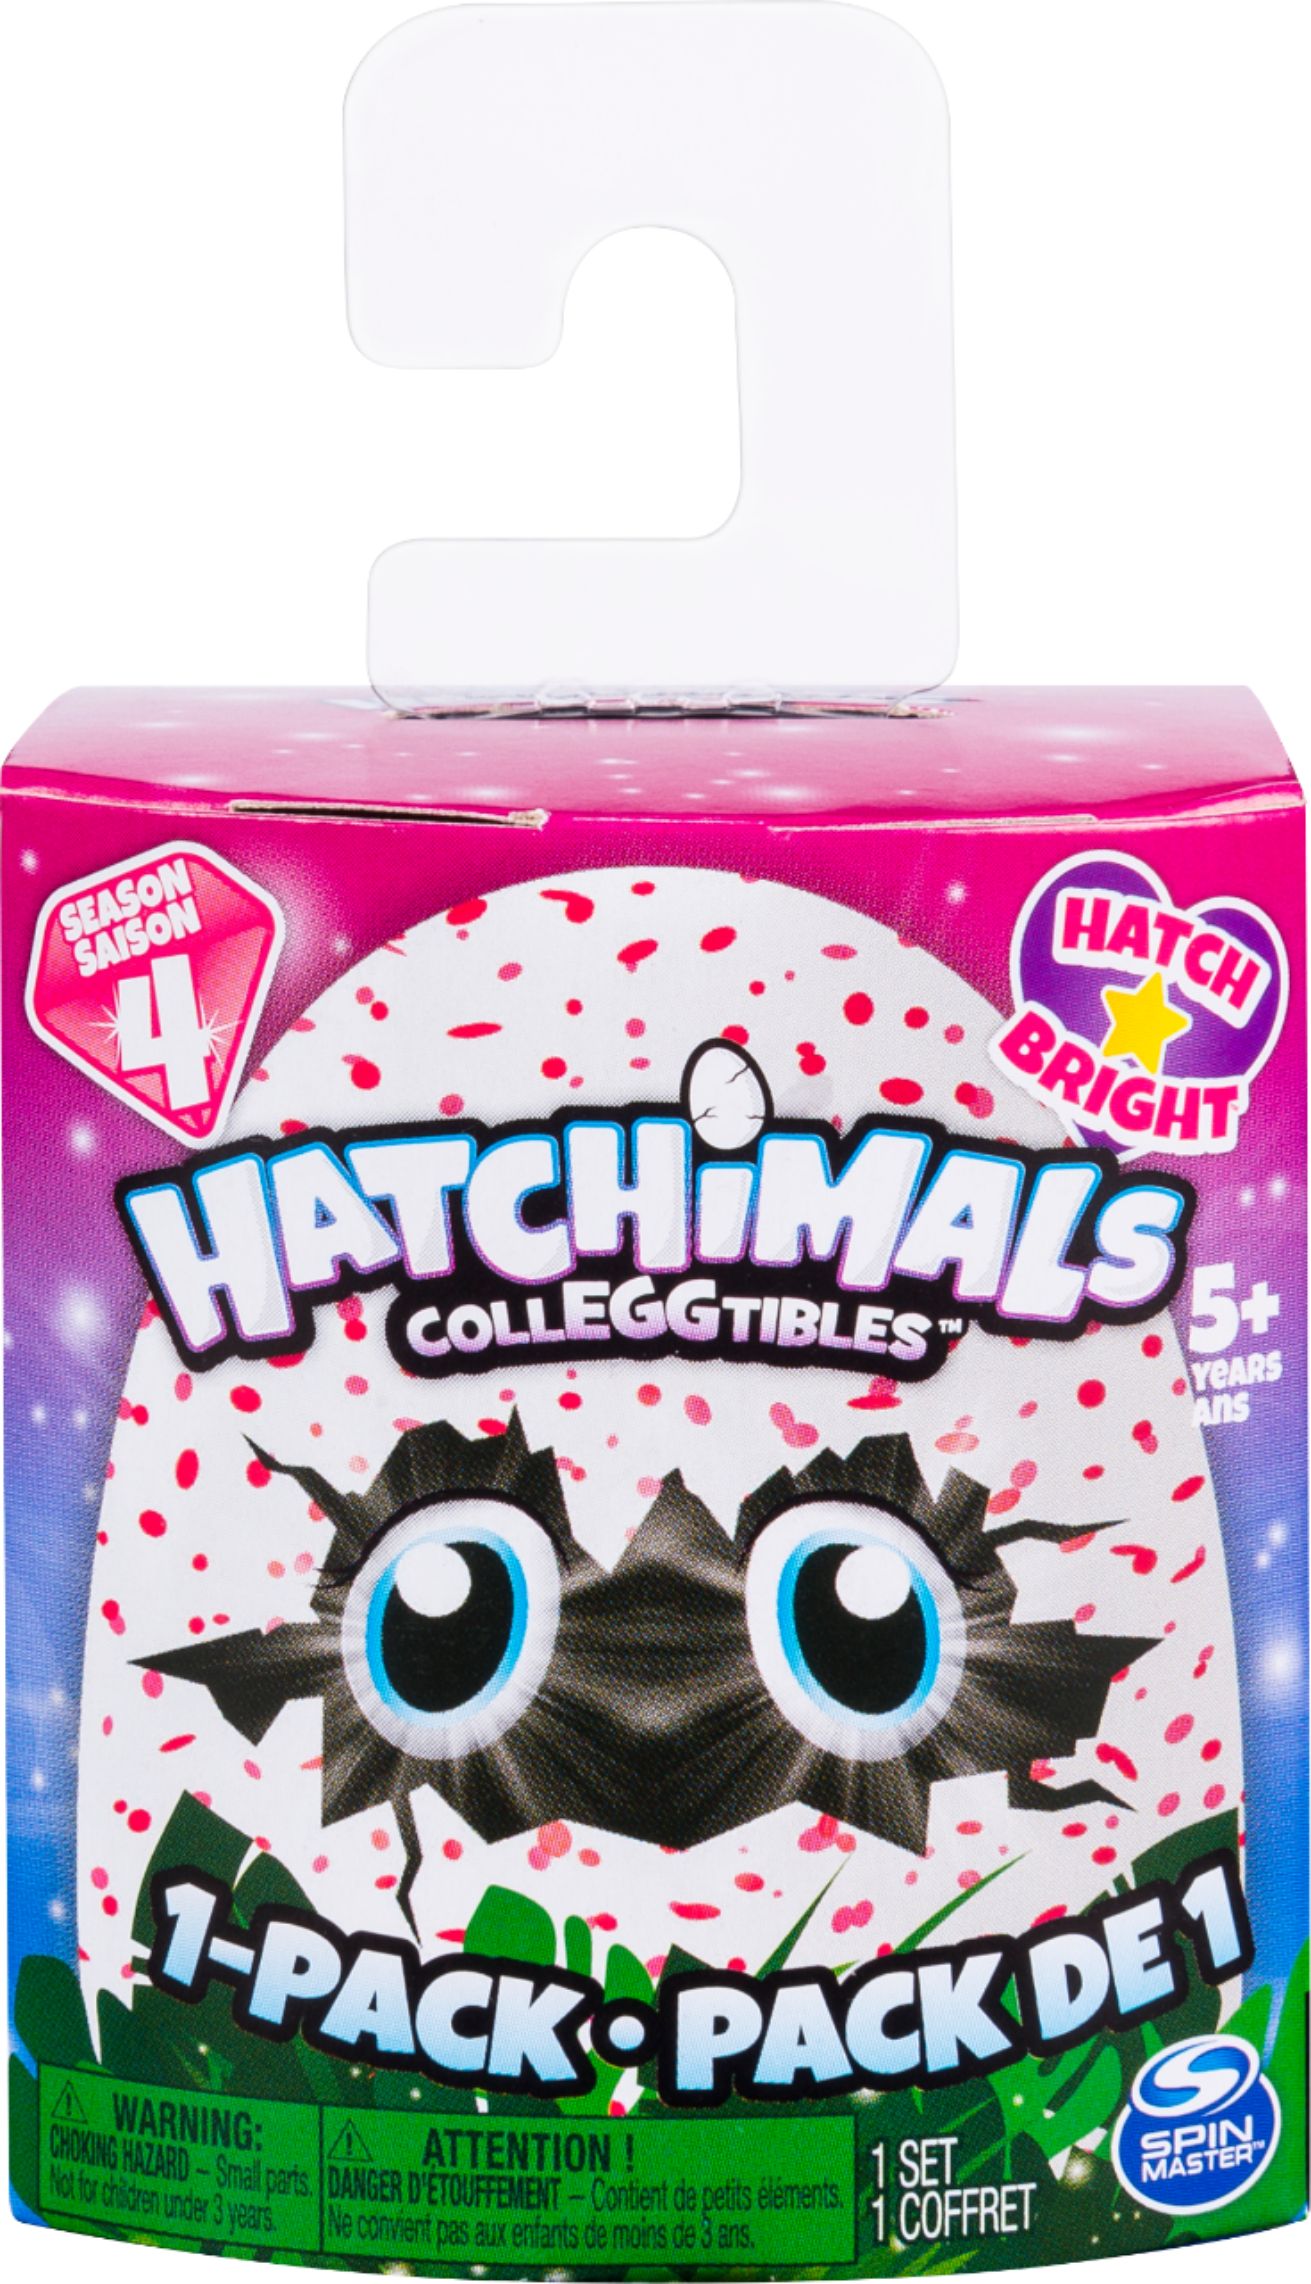 Limited Edition found! Hatchimals Colleggtibles 4 packs